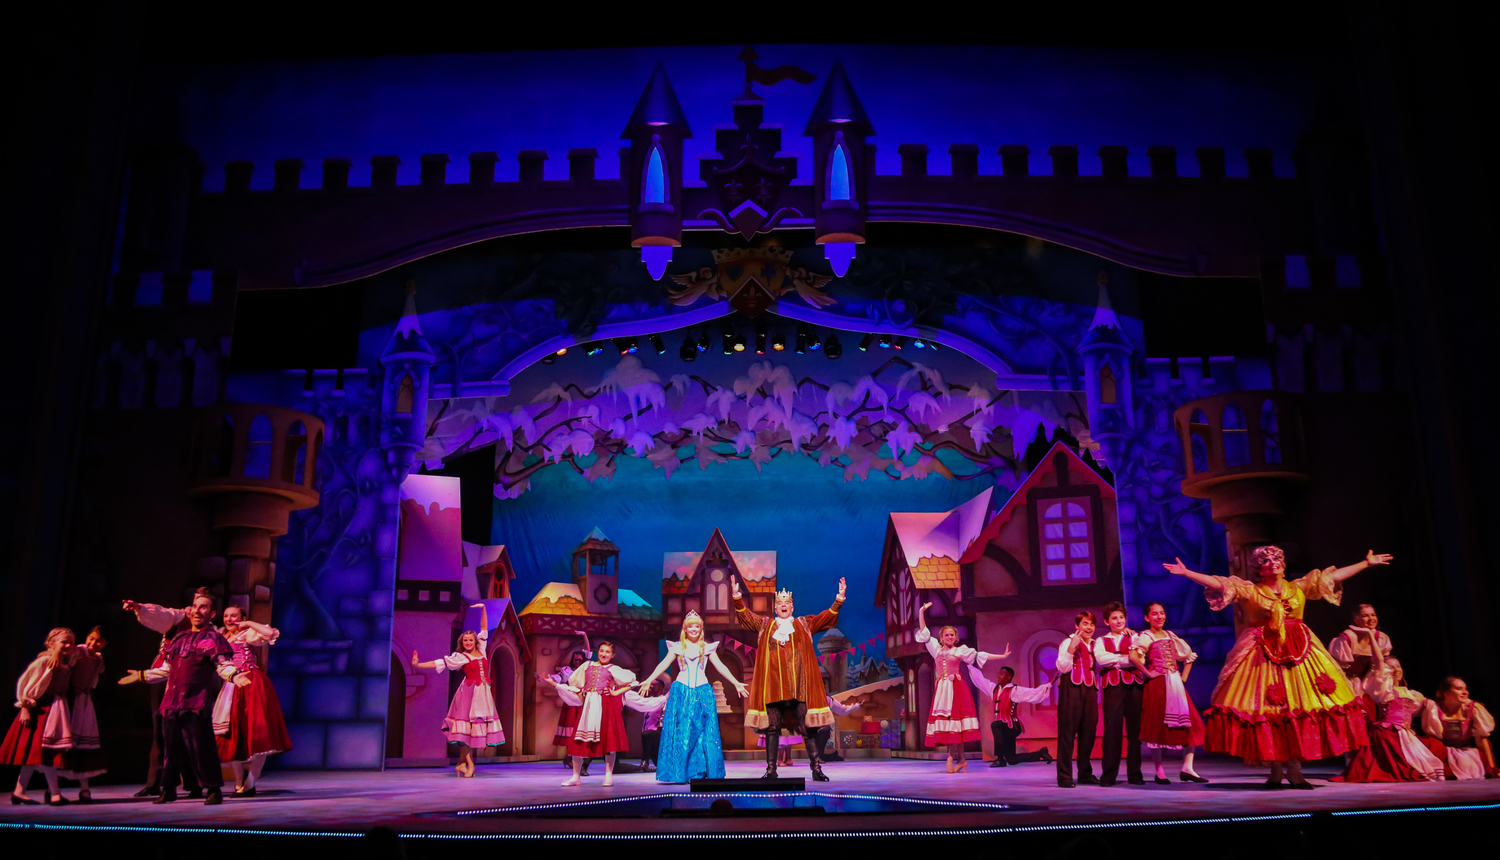 Review: SLEEPING BEAUTY AND HER WINTER KNIGHT Brings Out the Child in All at Theatre Under The Stars 